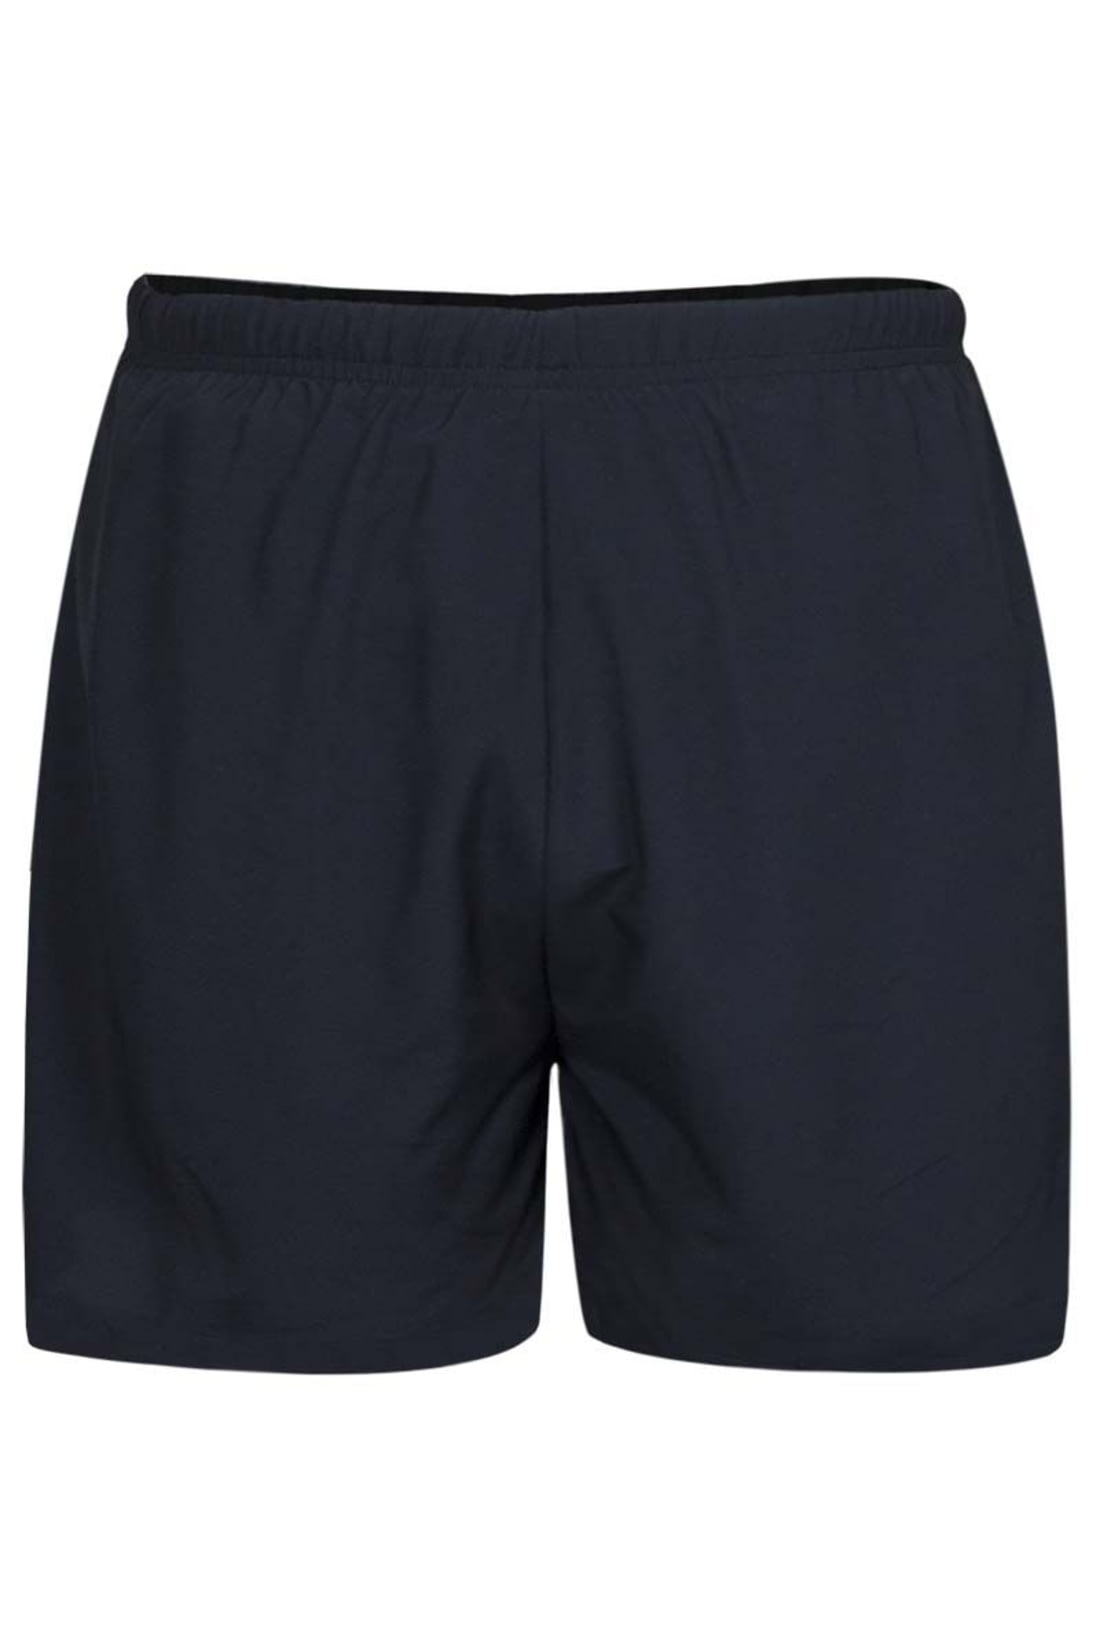 DRIFIRE Diver / PT Short - Men's , Up to $9.31 Off with Free S&H ...